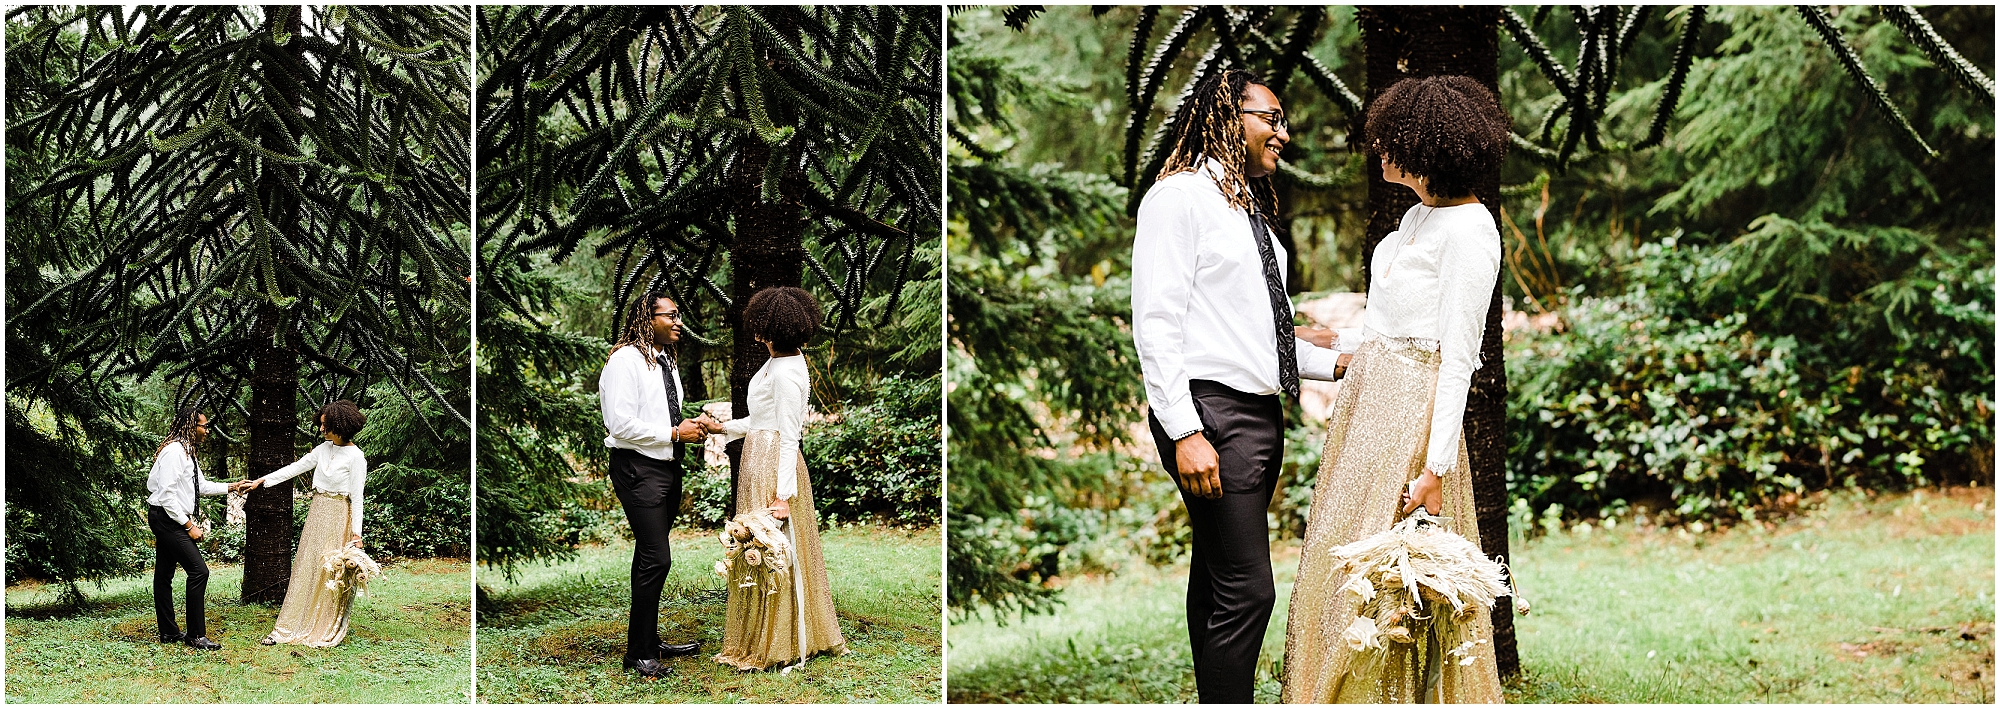 A groom smiles as he sees his gorgeous bride for the first look in the forest outside their cabin on their Oregon Coast elopement day. | Erica Swantek Photography